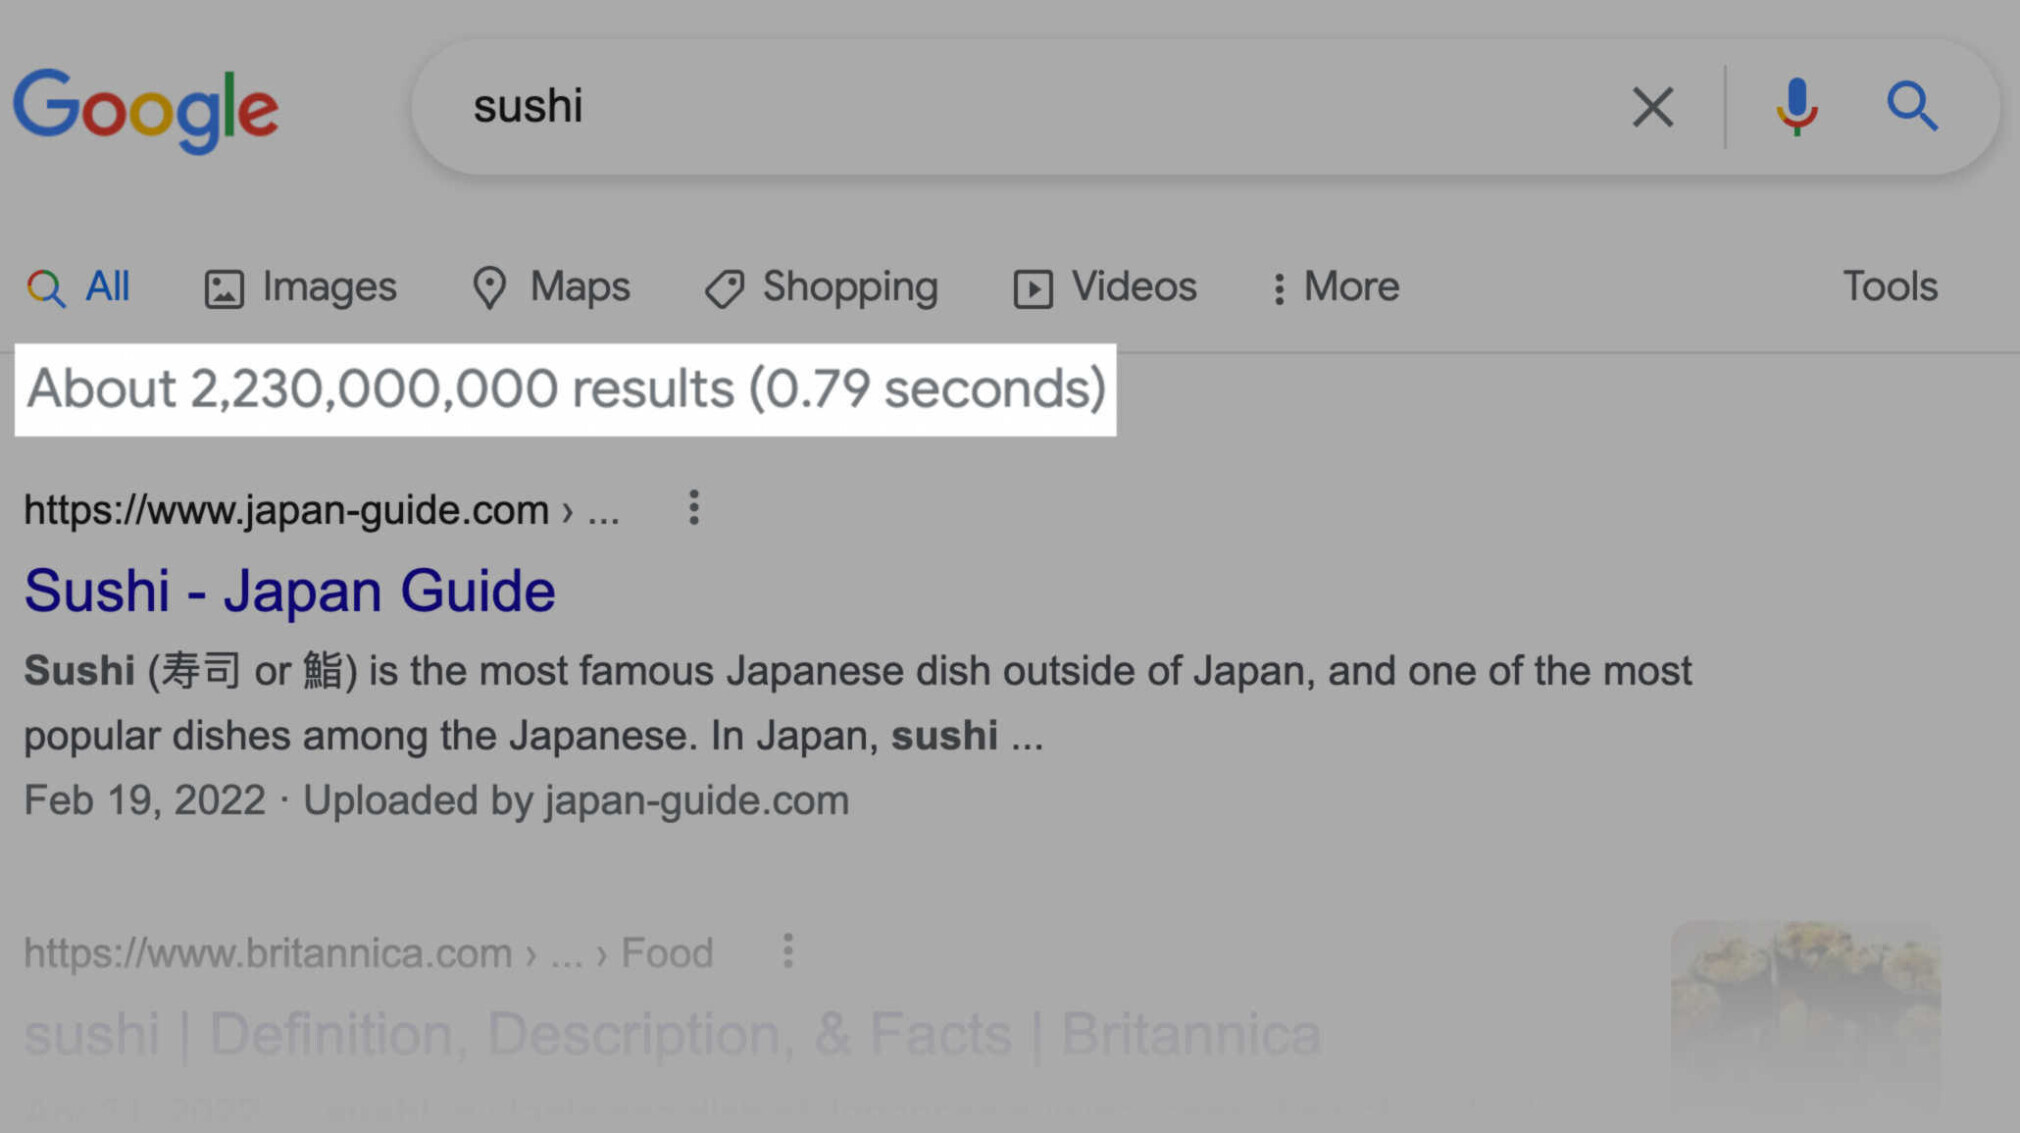 Search results for "sushi"